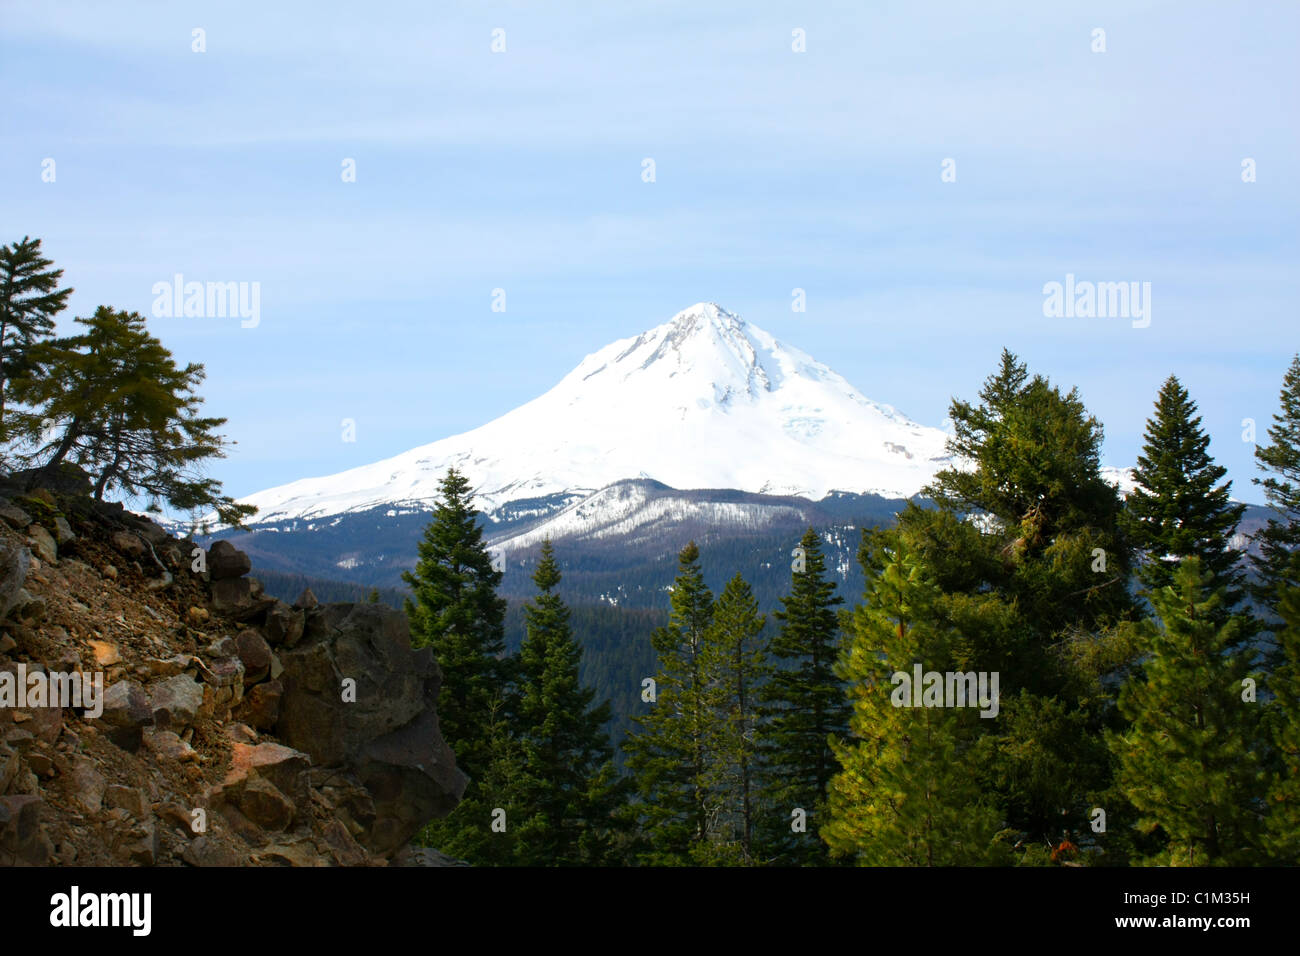 40,257.07614 A distant snow-covered mountain - Mt Hood (11,240 ft tall) - peaks over a tree covered rocky ridge top, against a soft blue sky. Stock Photo